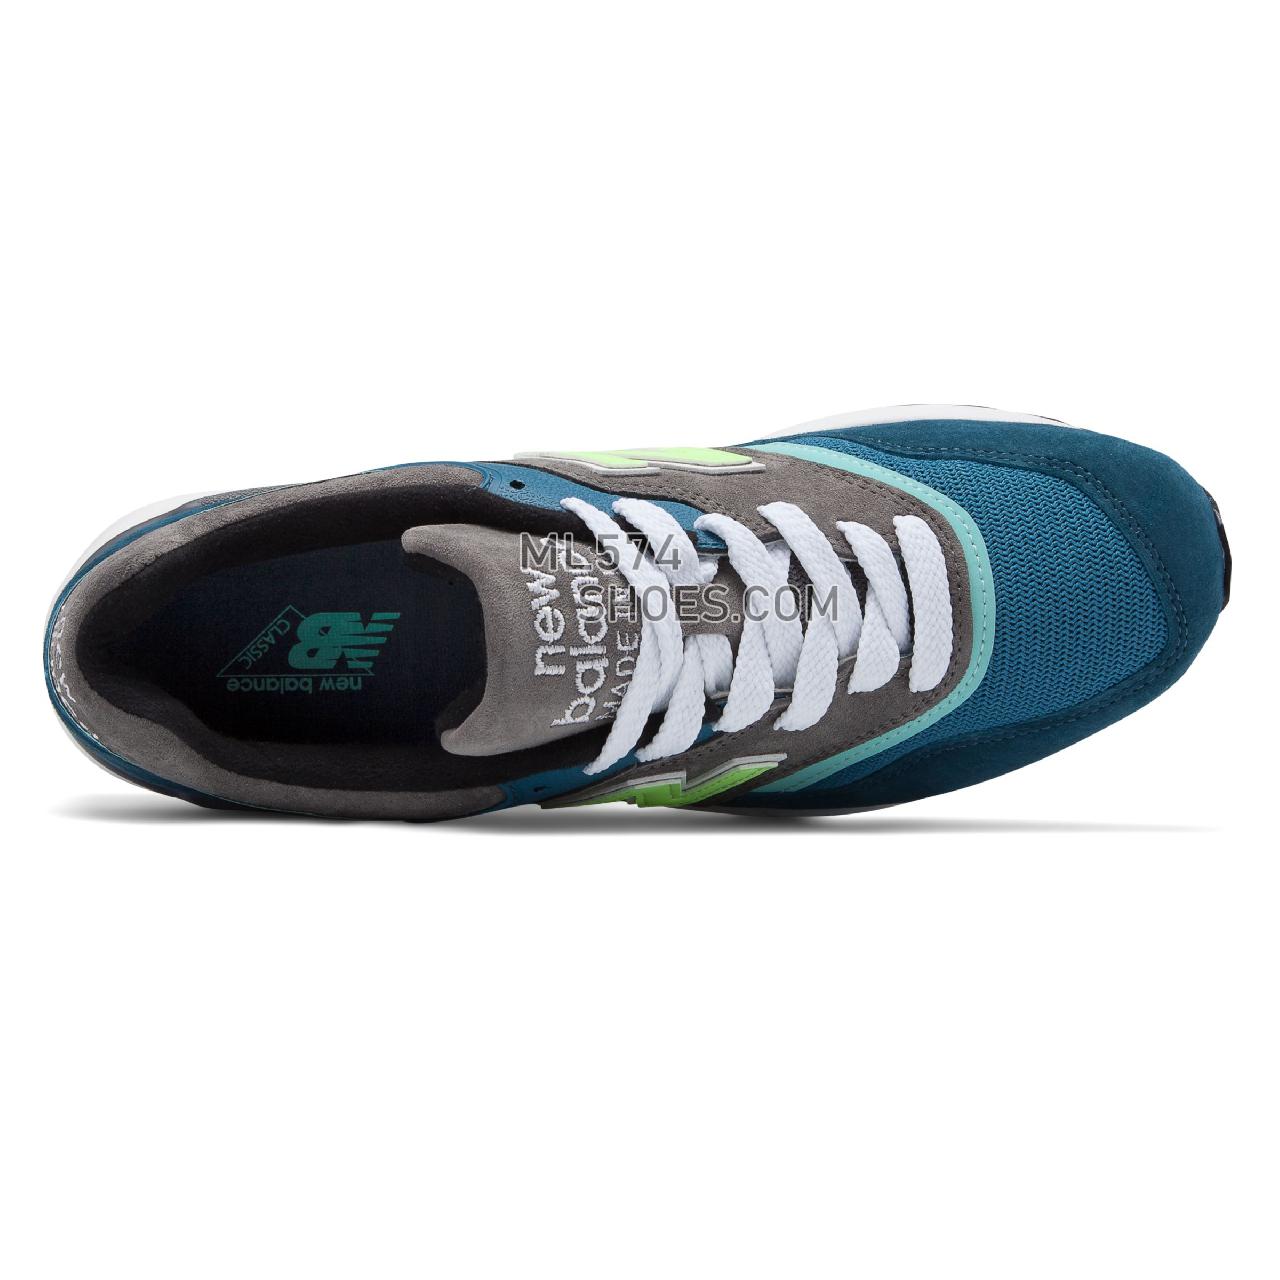 New Balance Made in US 997 - Men's 997 Made in US Classic M997-PGM - Blue with Green - M997PAC